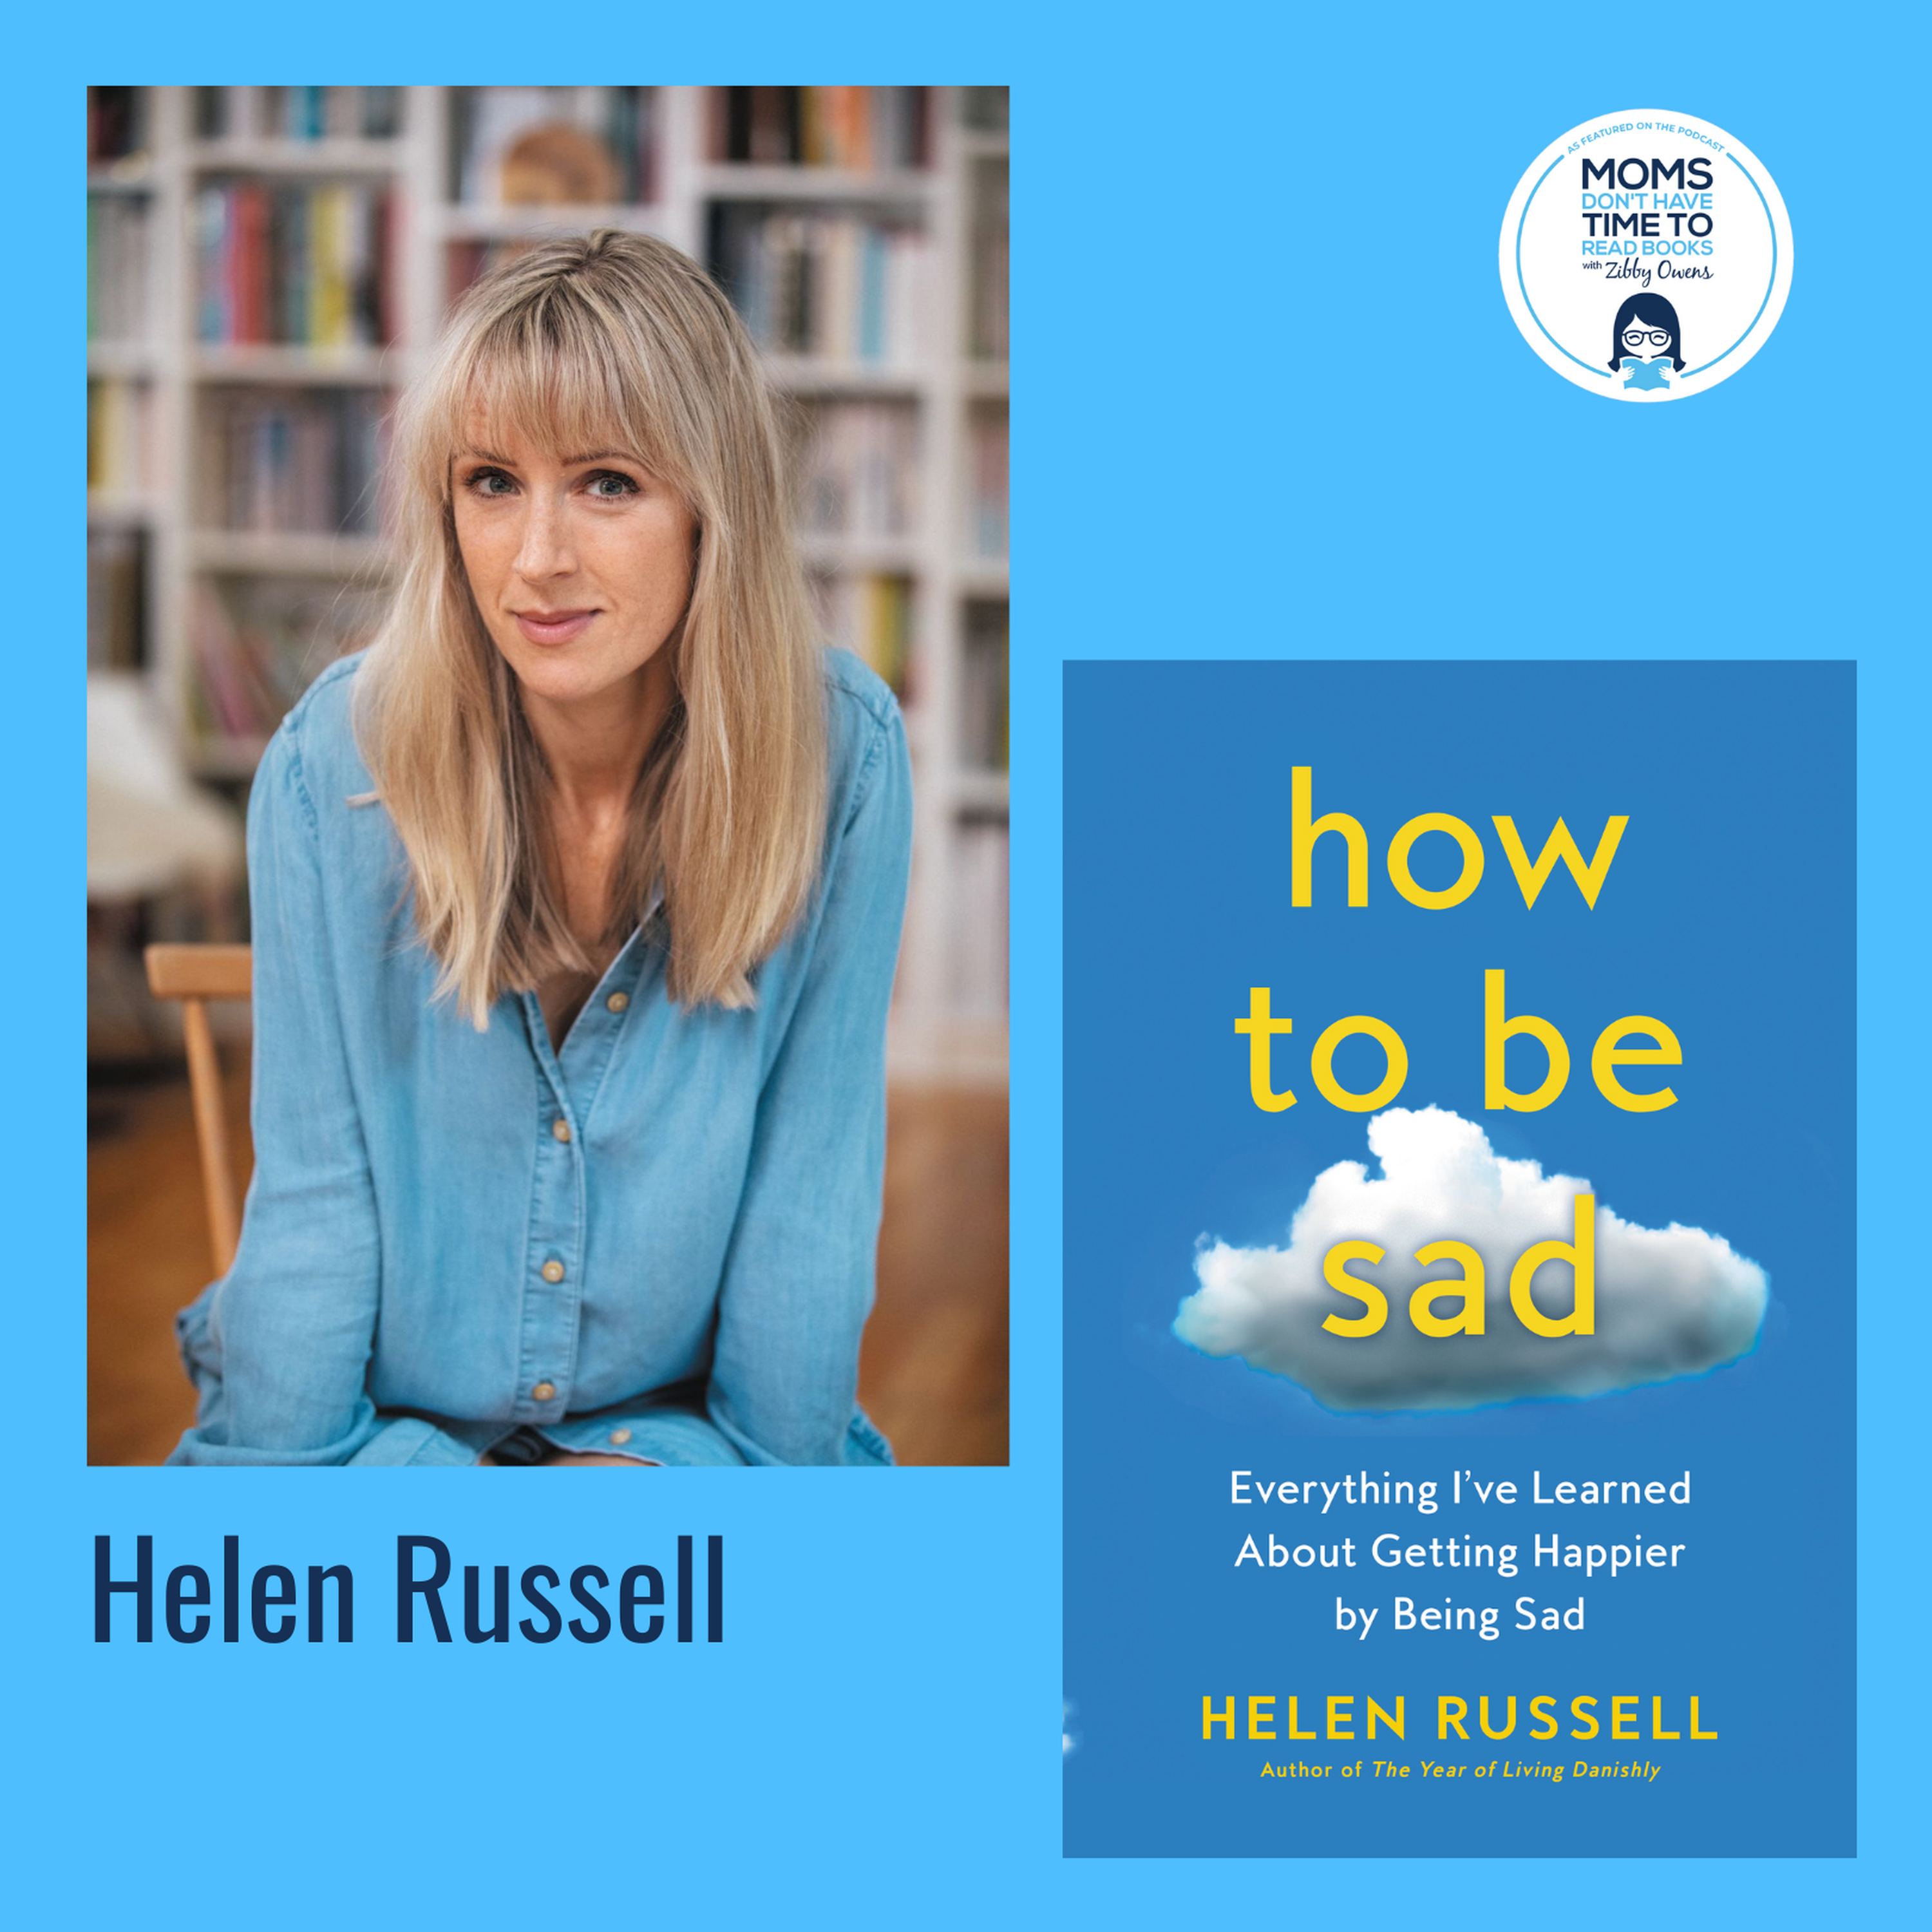 Helen Russell, HOW TO BE SAD: Everything I've Learned About Getting Happier by Being Sad